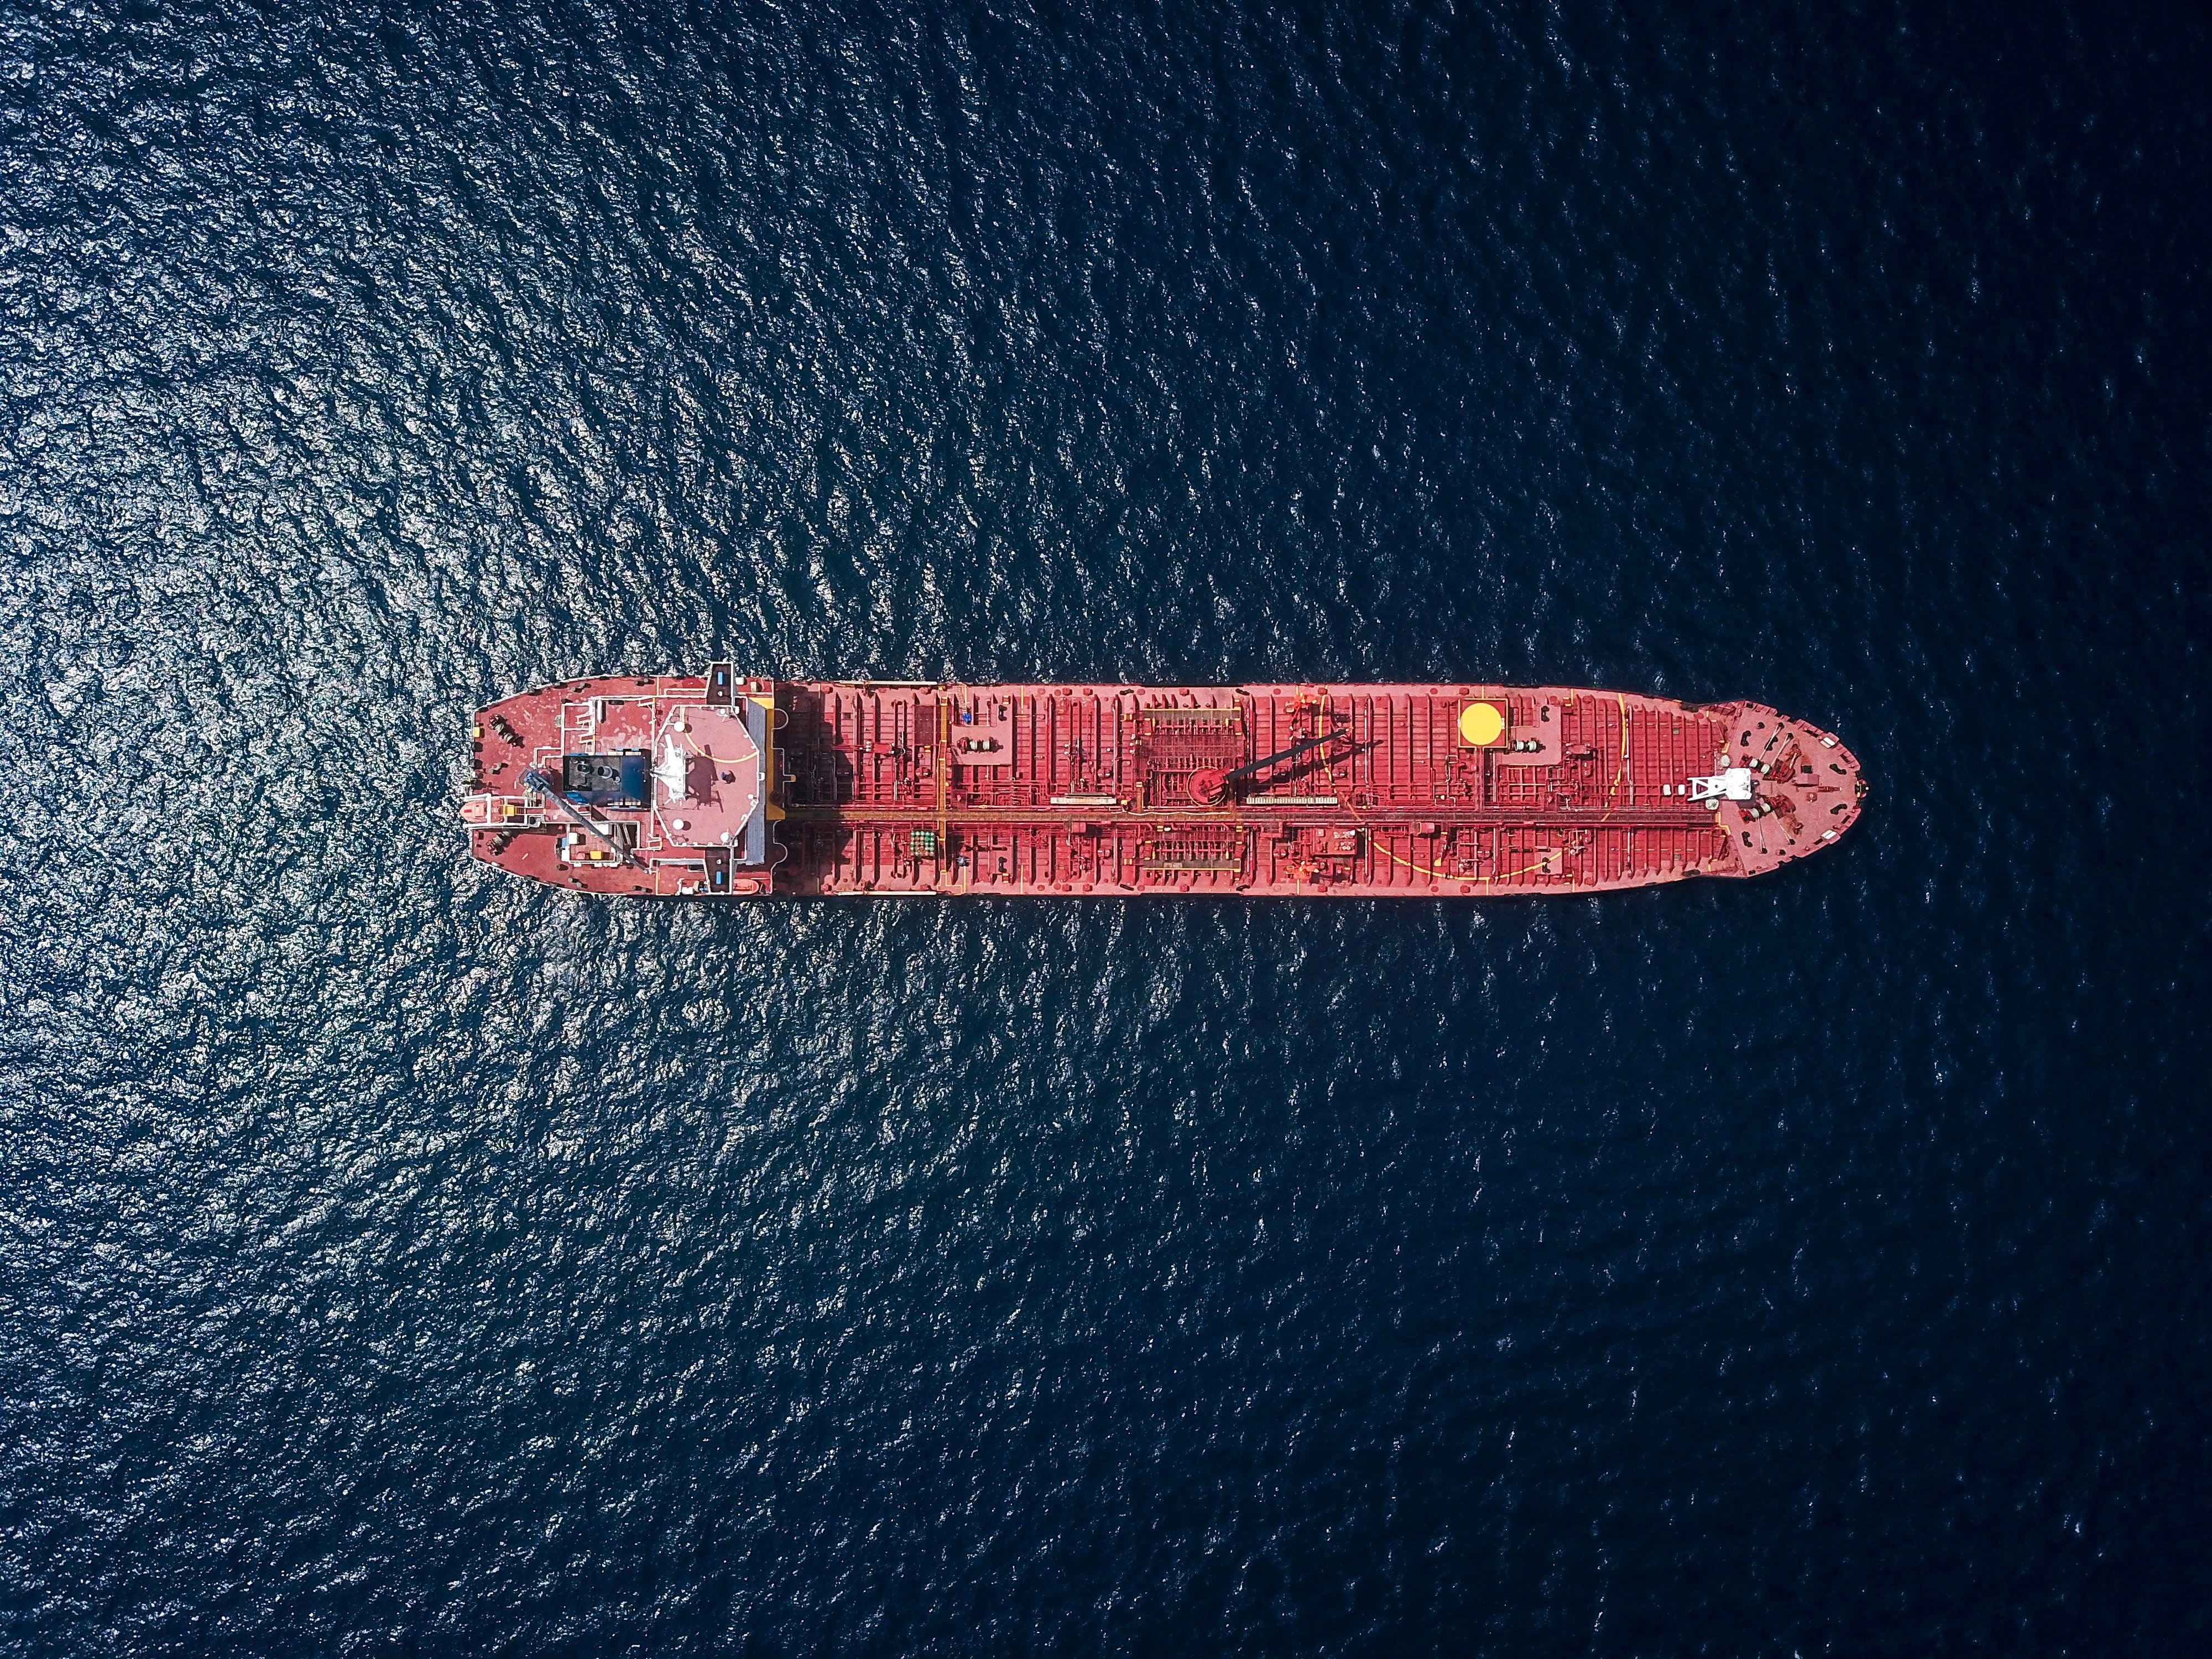 Aerial shot of a ship in the water